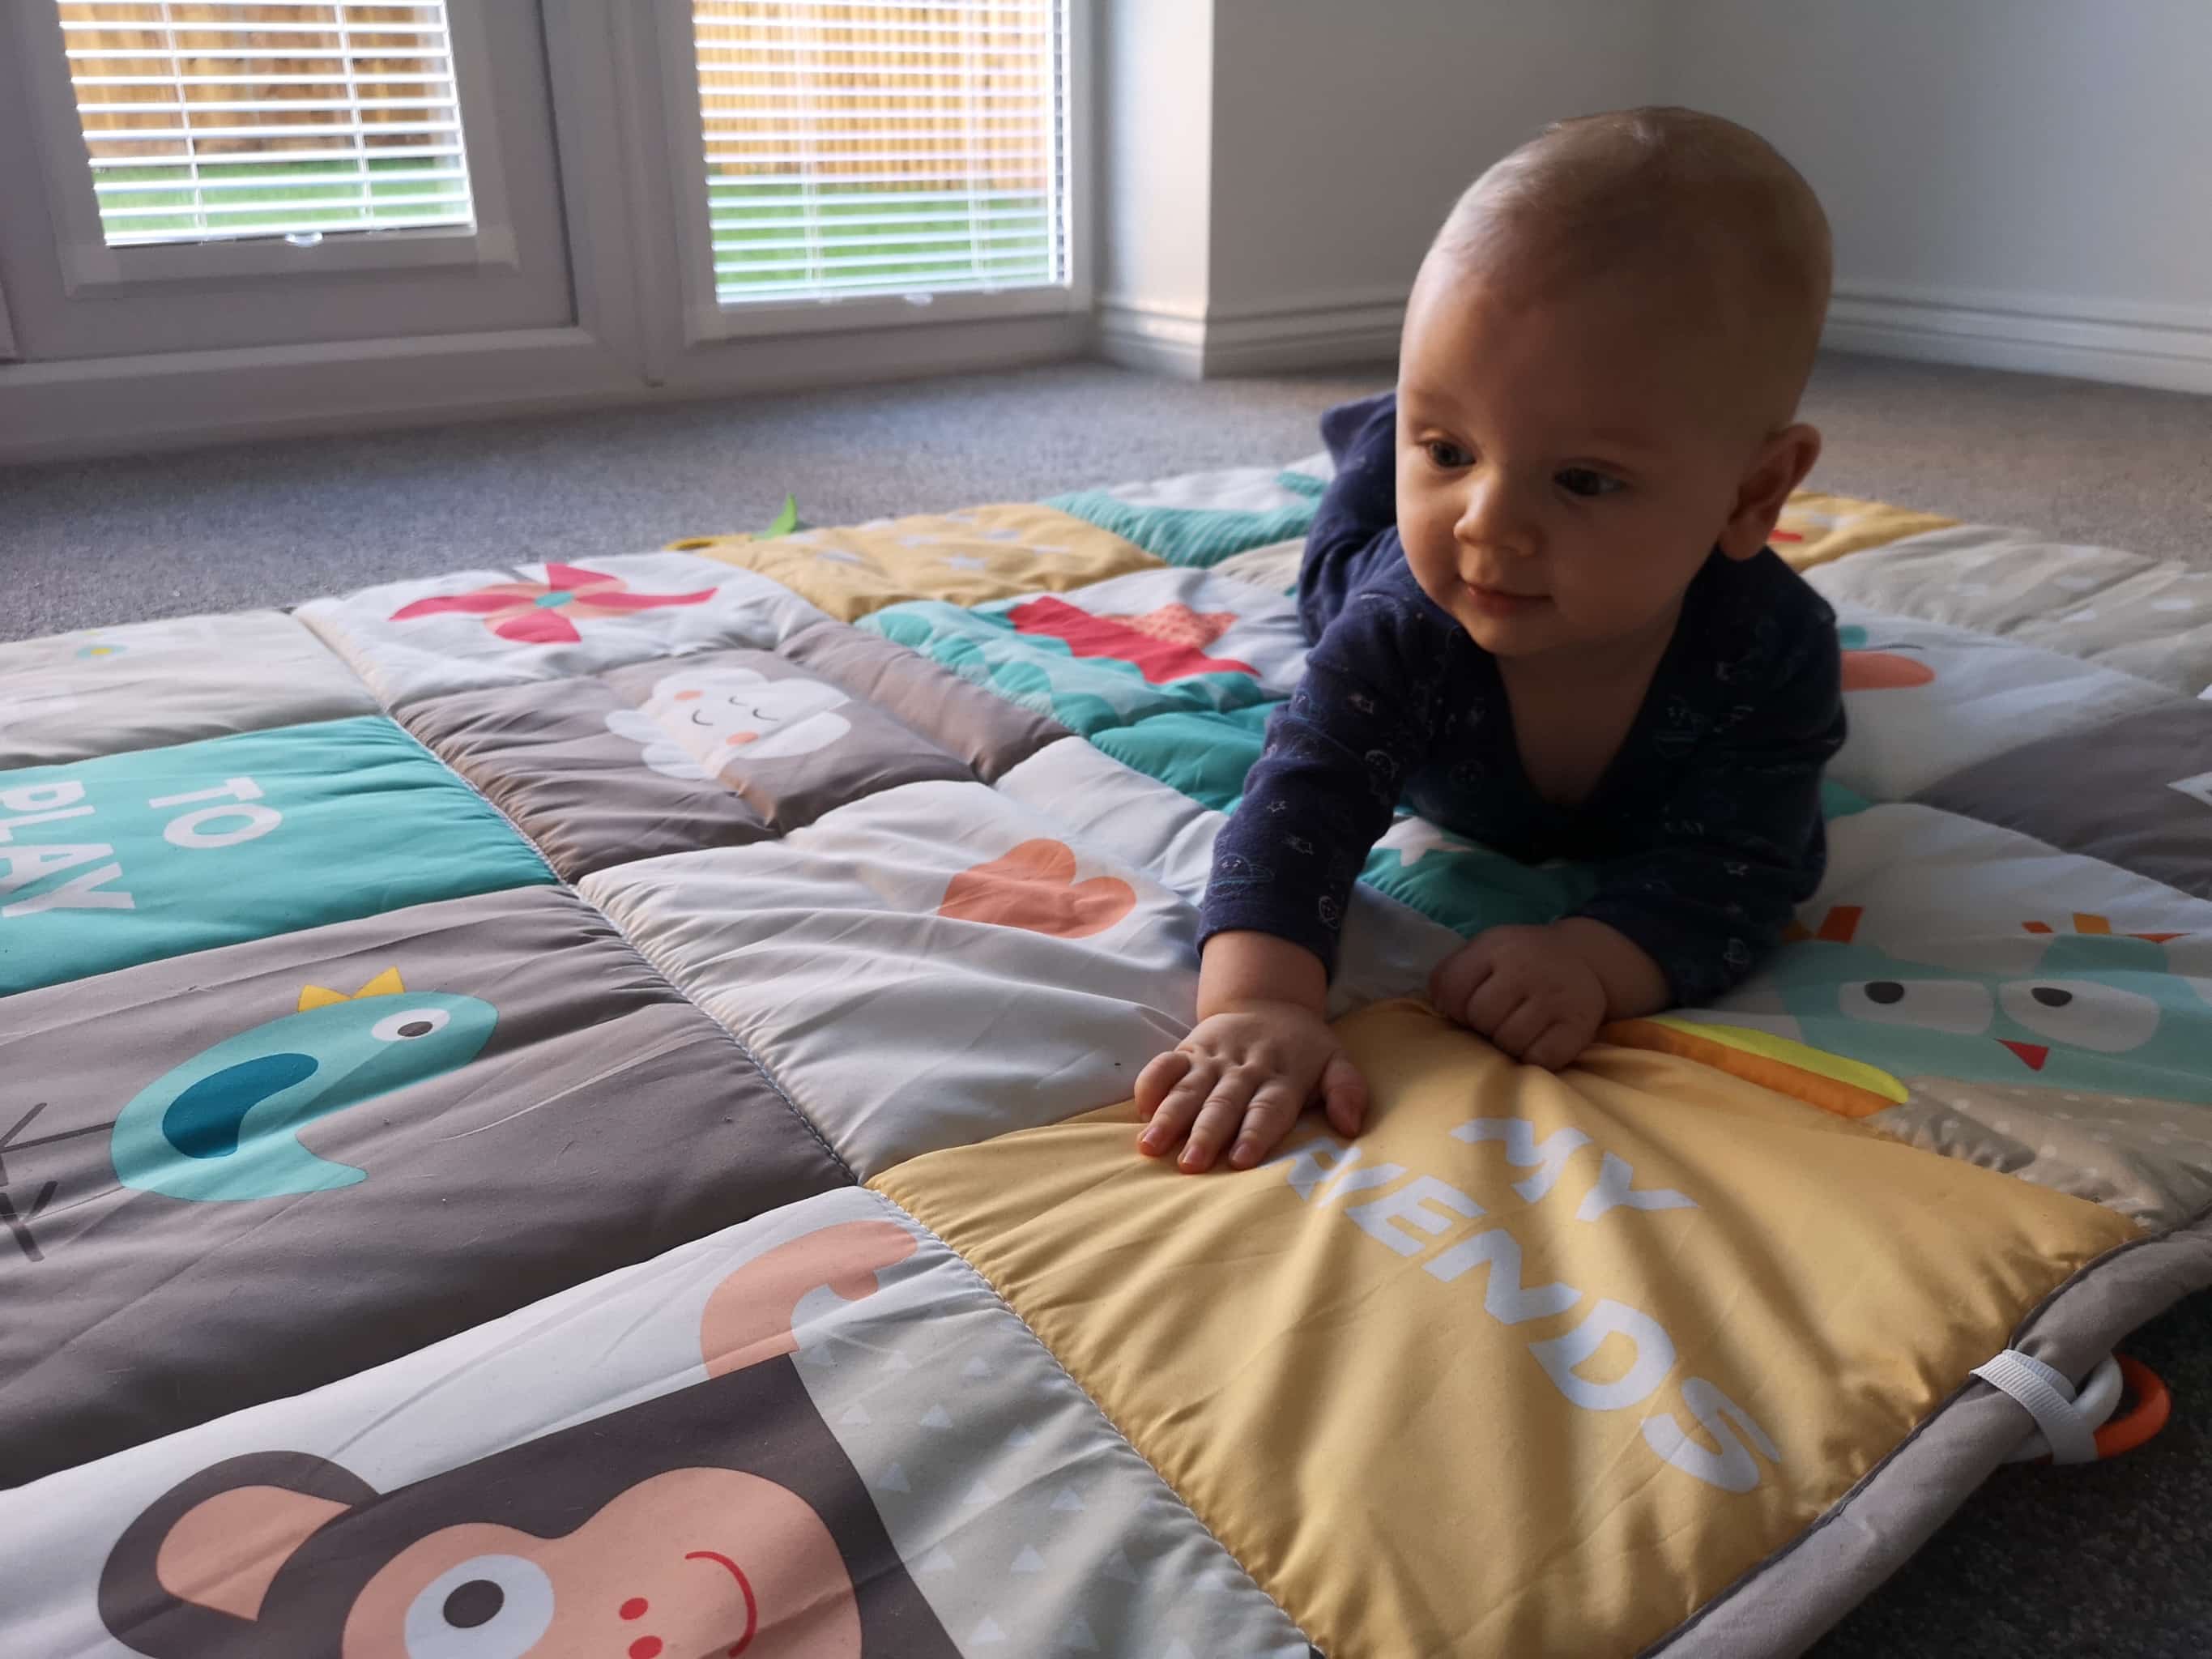 Taf Toys I Love Big Mat - Play Mat - Review - Soph-obsessed